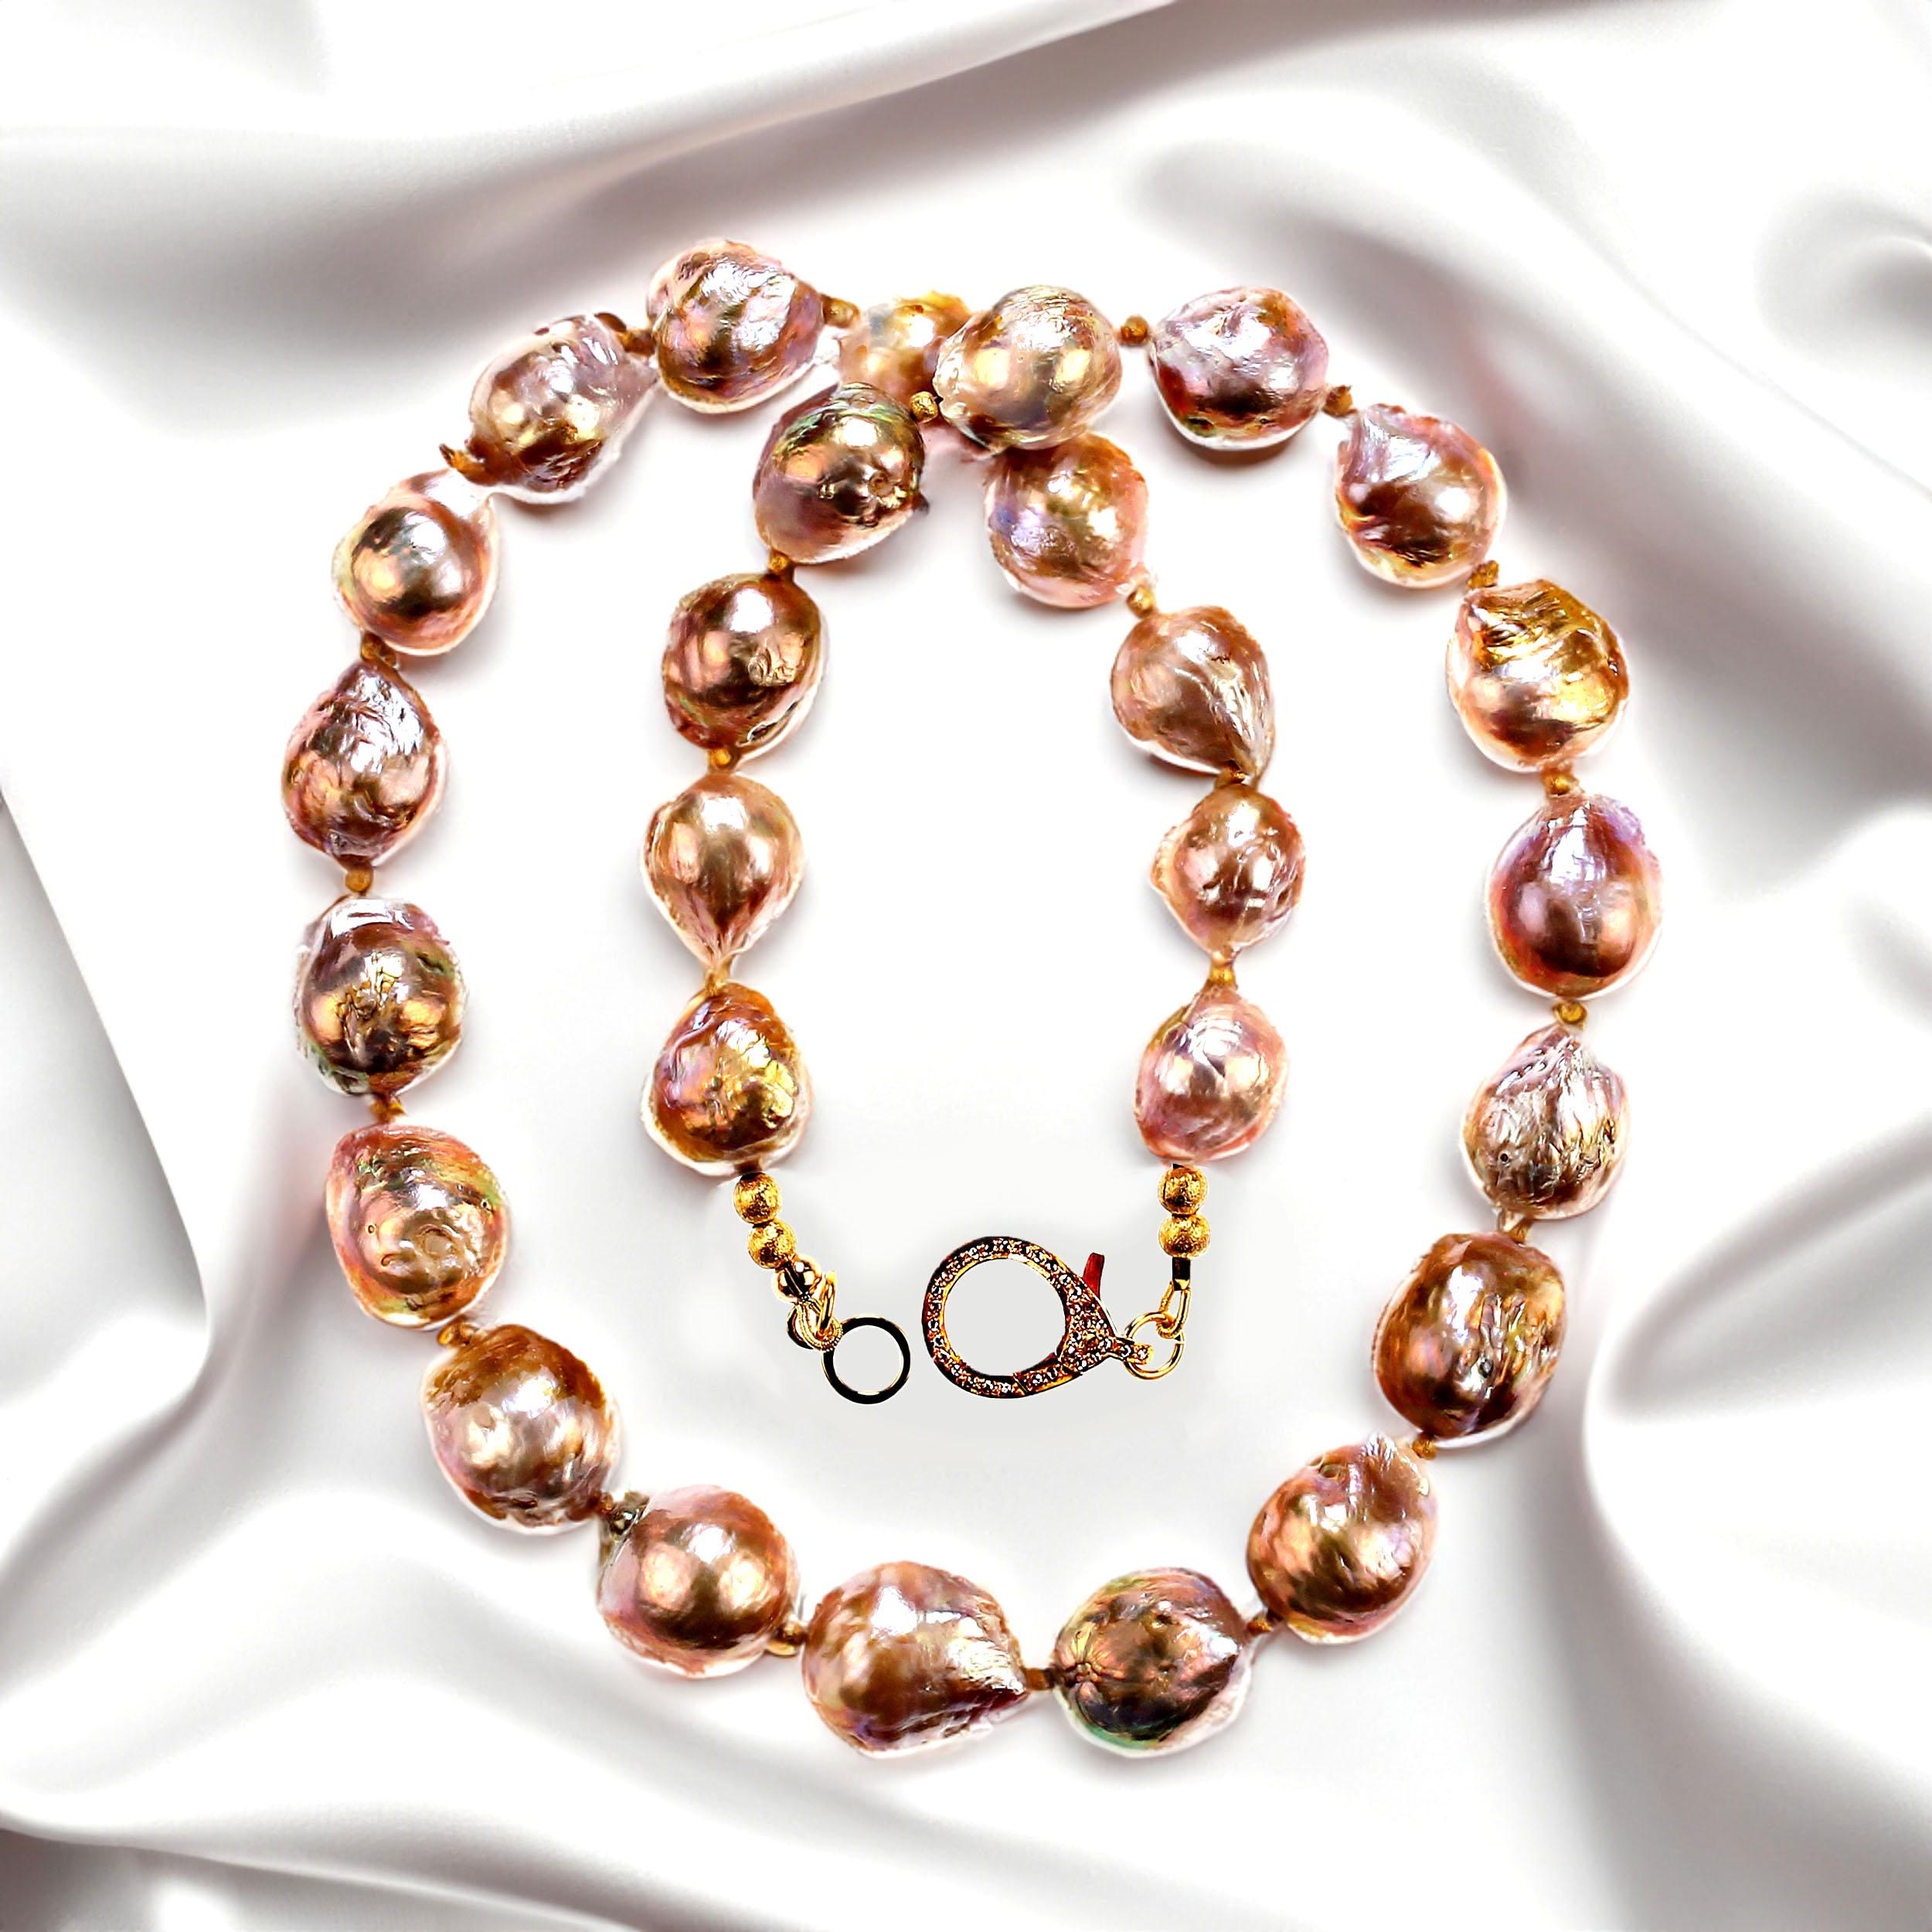 21 Inch elegant baroque pearl necklace with goldy accents.  These gorgeous 11-15 mm gold pearls feature pink and blue flashes.  The necklace is secured with a lobster claw clasp with diamond chips. 
 MN2357